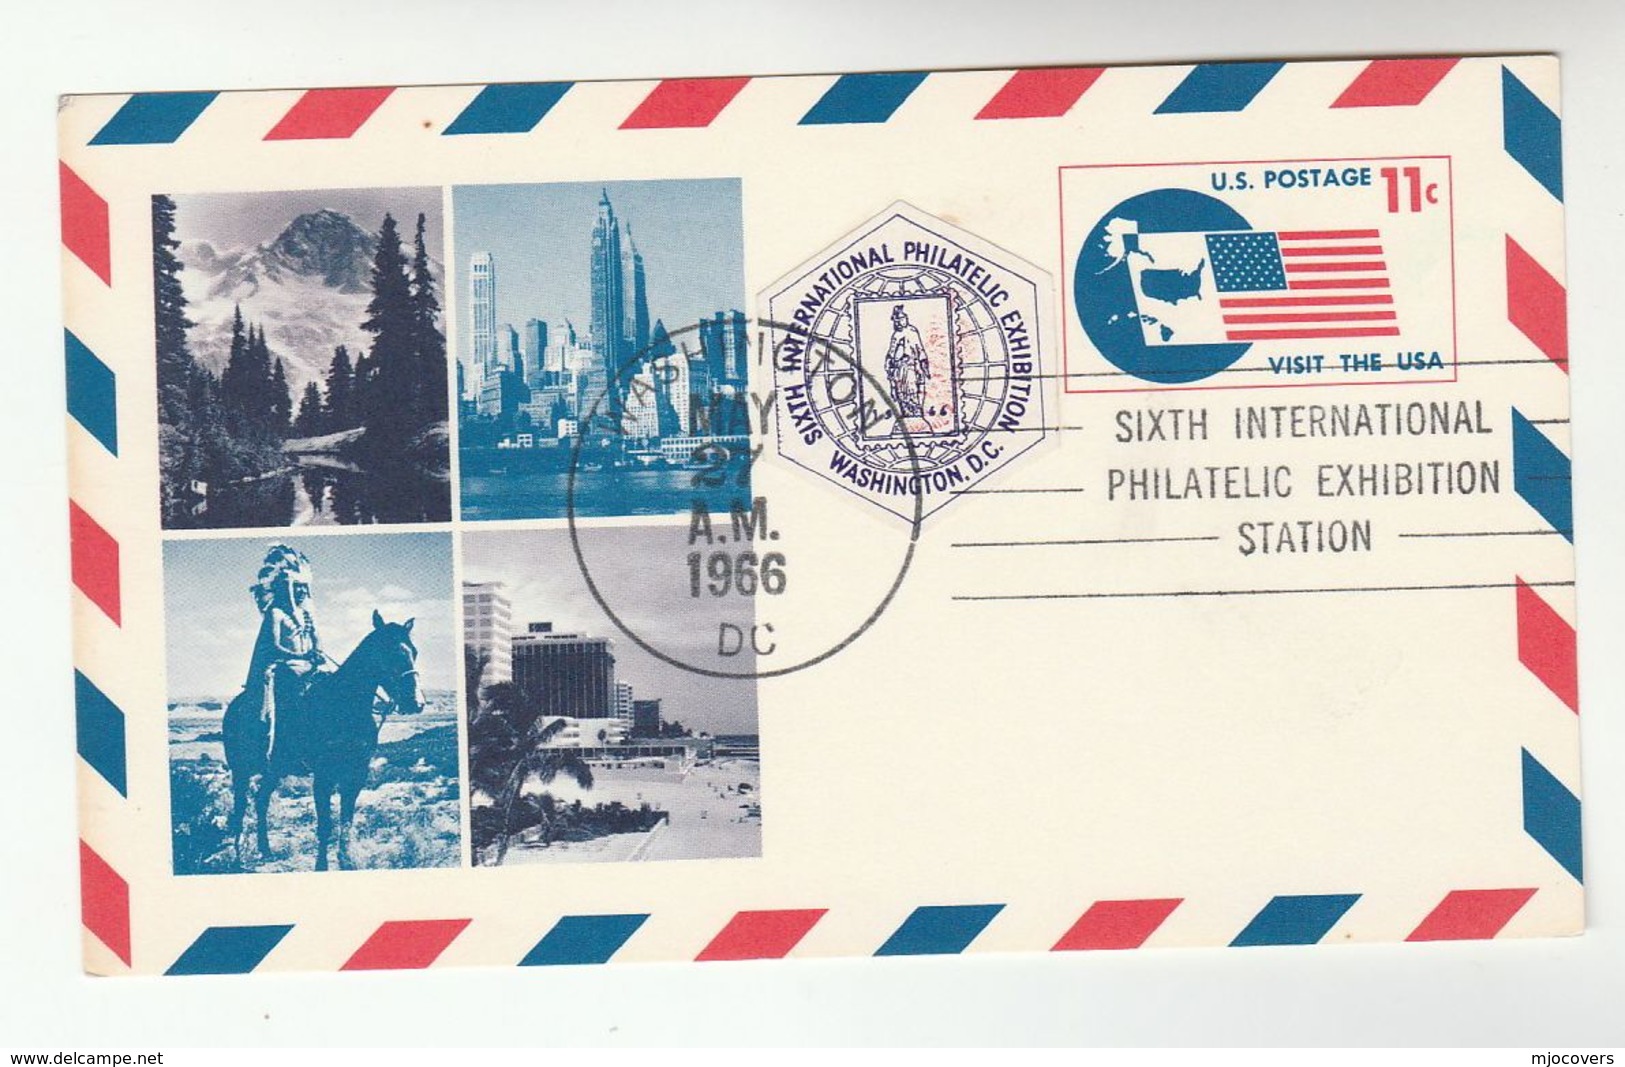 1966 Philatelic EXHIBITION Pmk USA AIRMAIL Postal STATIONERY CARD With EXHIBITION LABEL Illus VISIT USA Stamps Cover Fdc - 1961-80